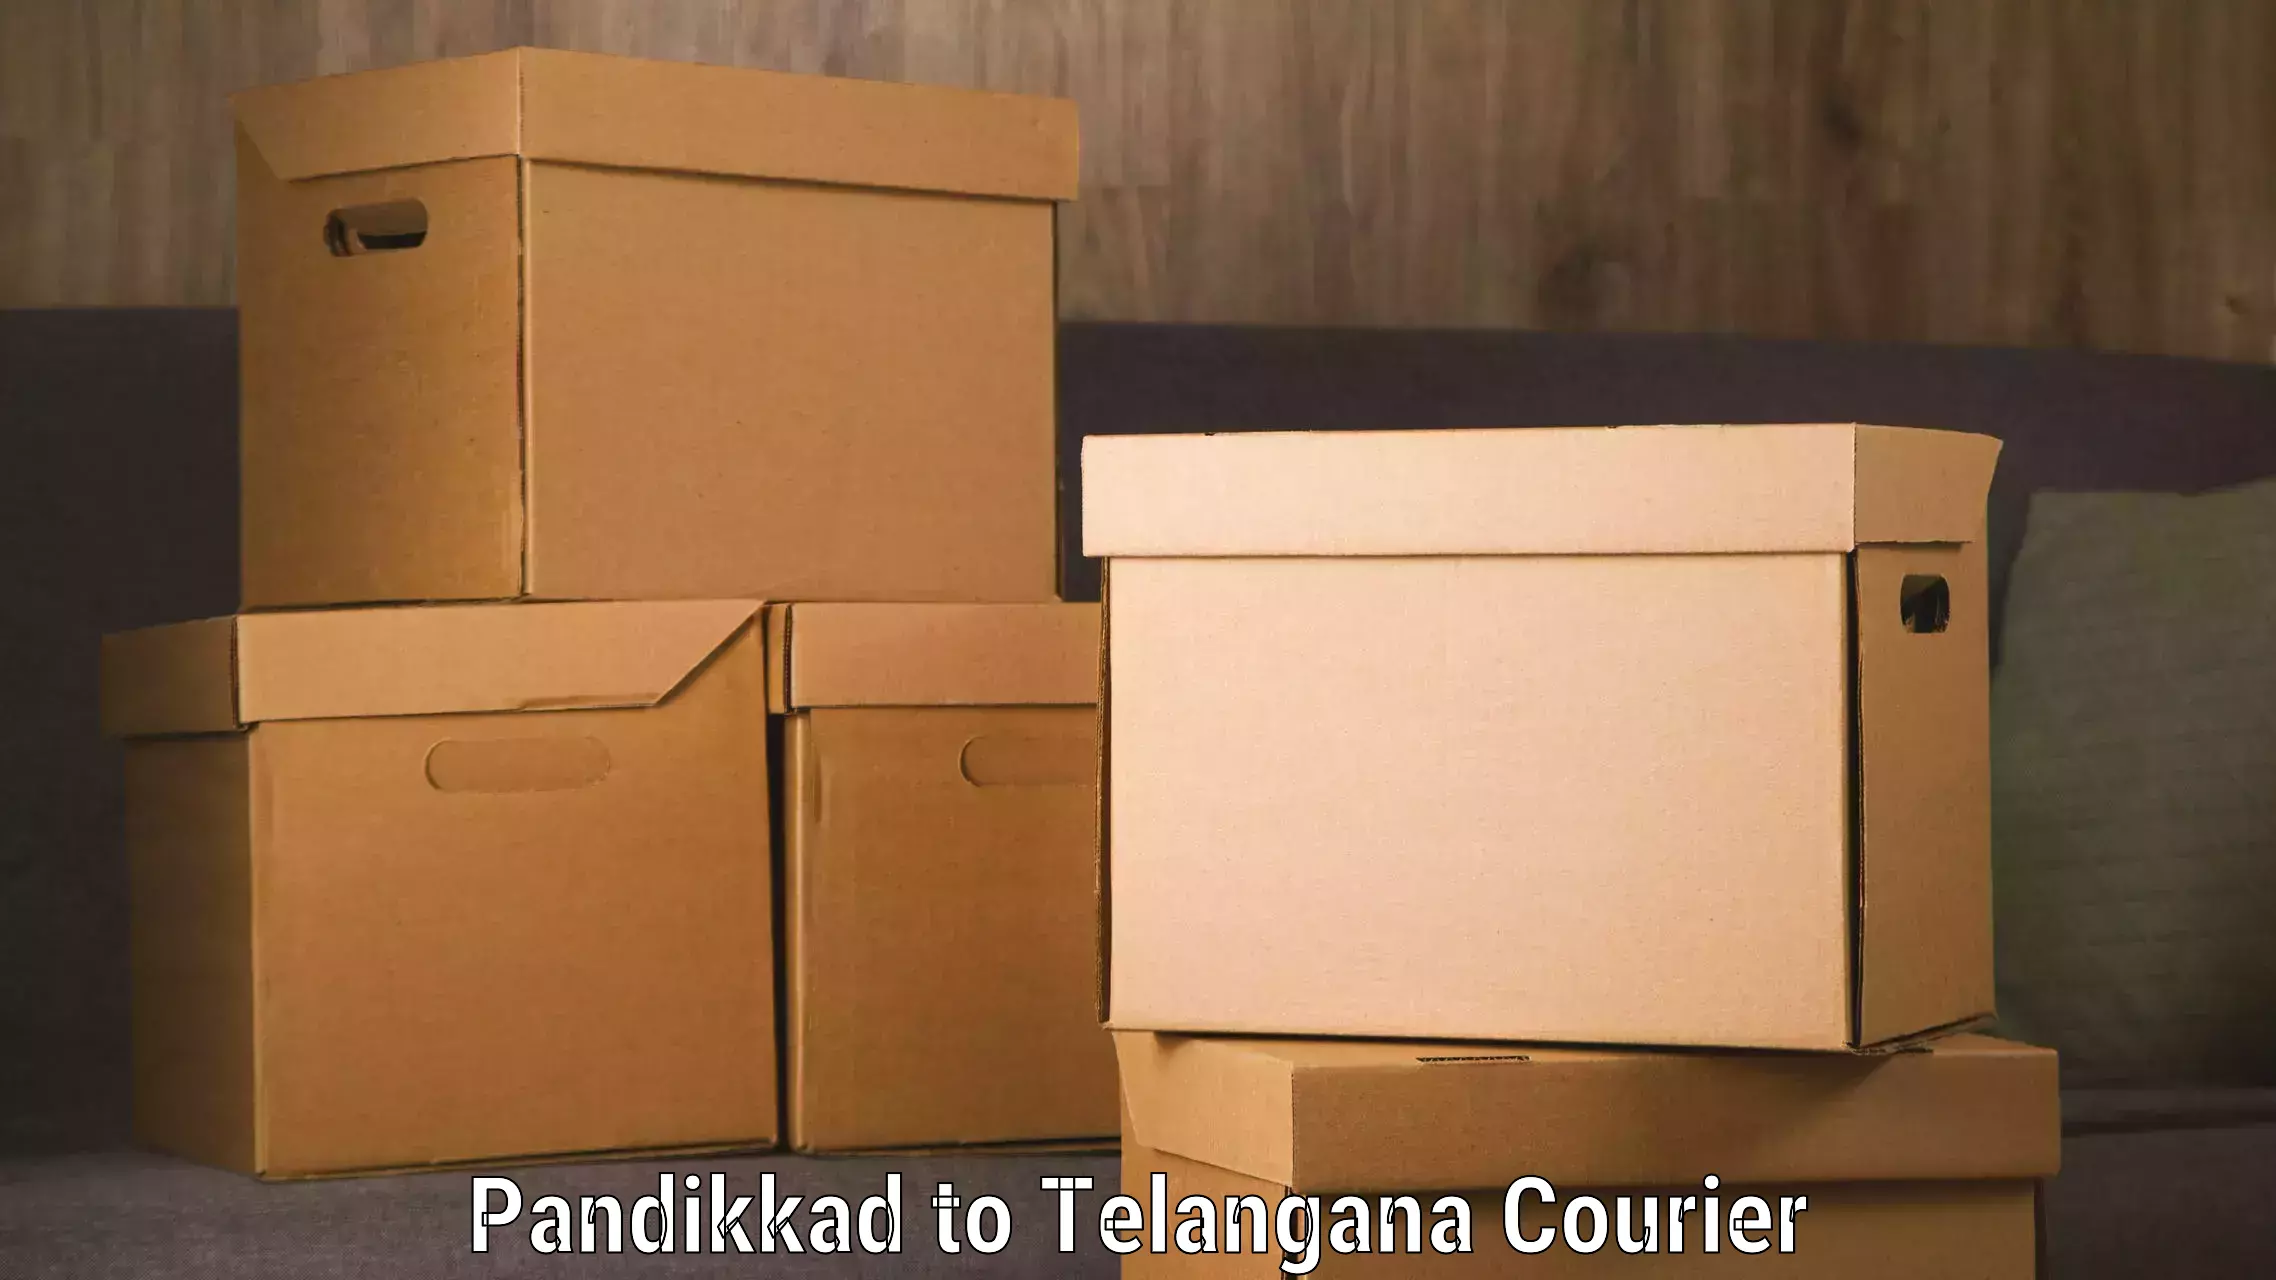 Local delivery service Pandikkad to Telangana